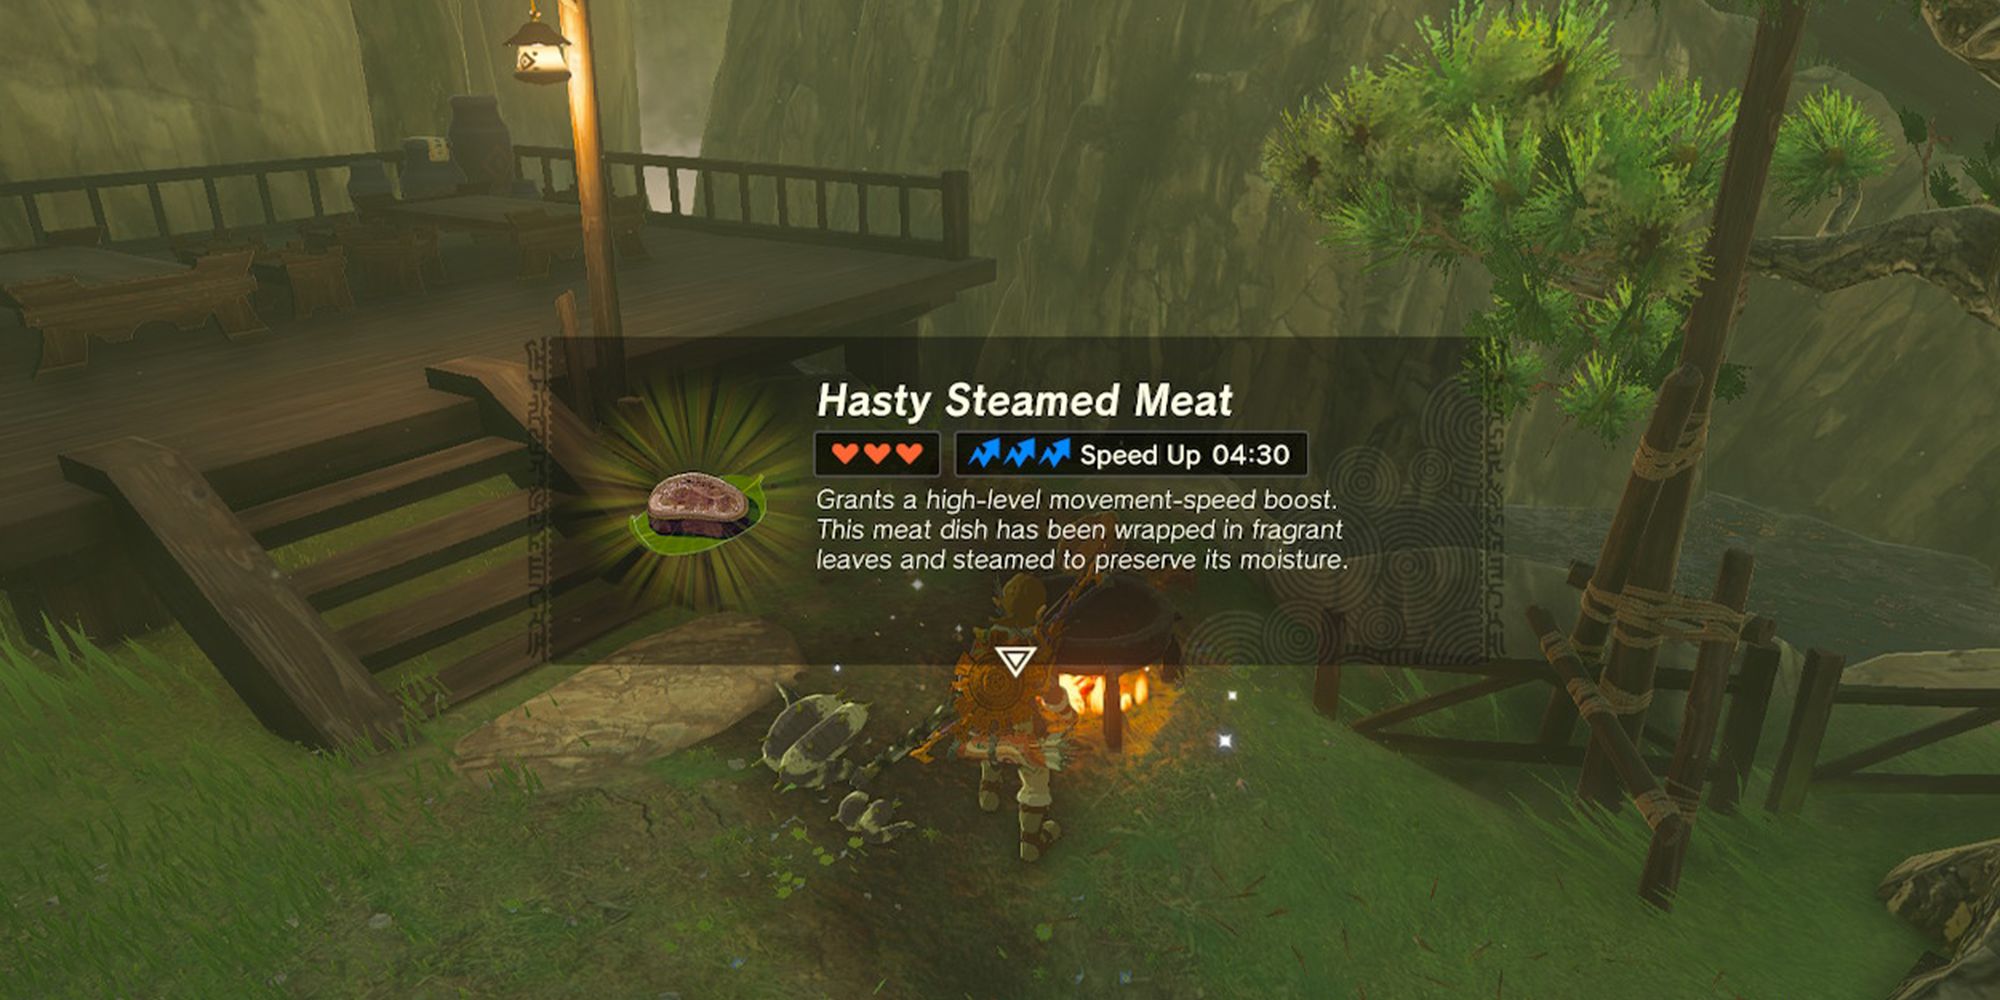 Hasty Steamed Meat recipe